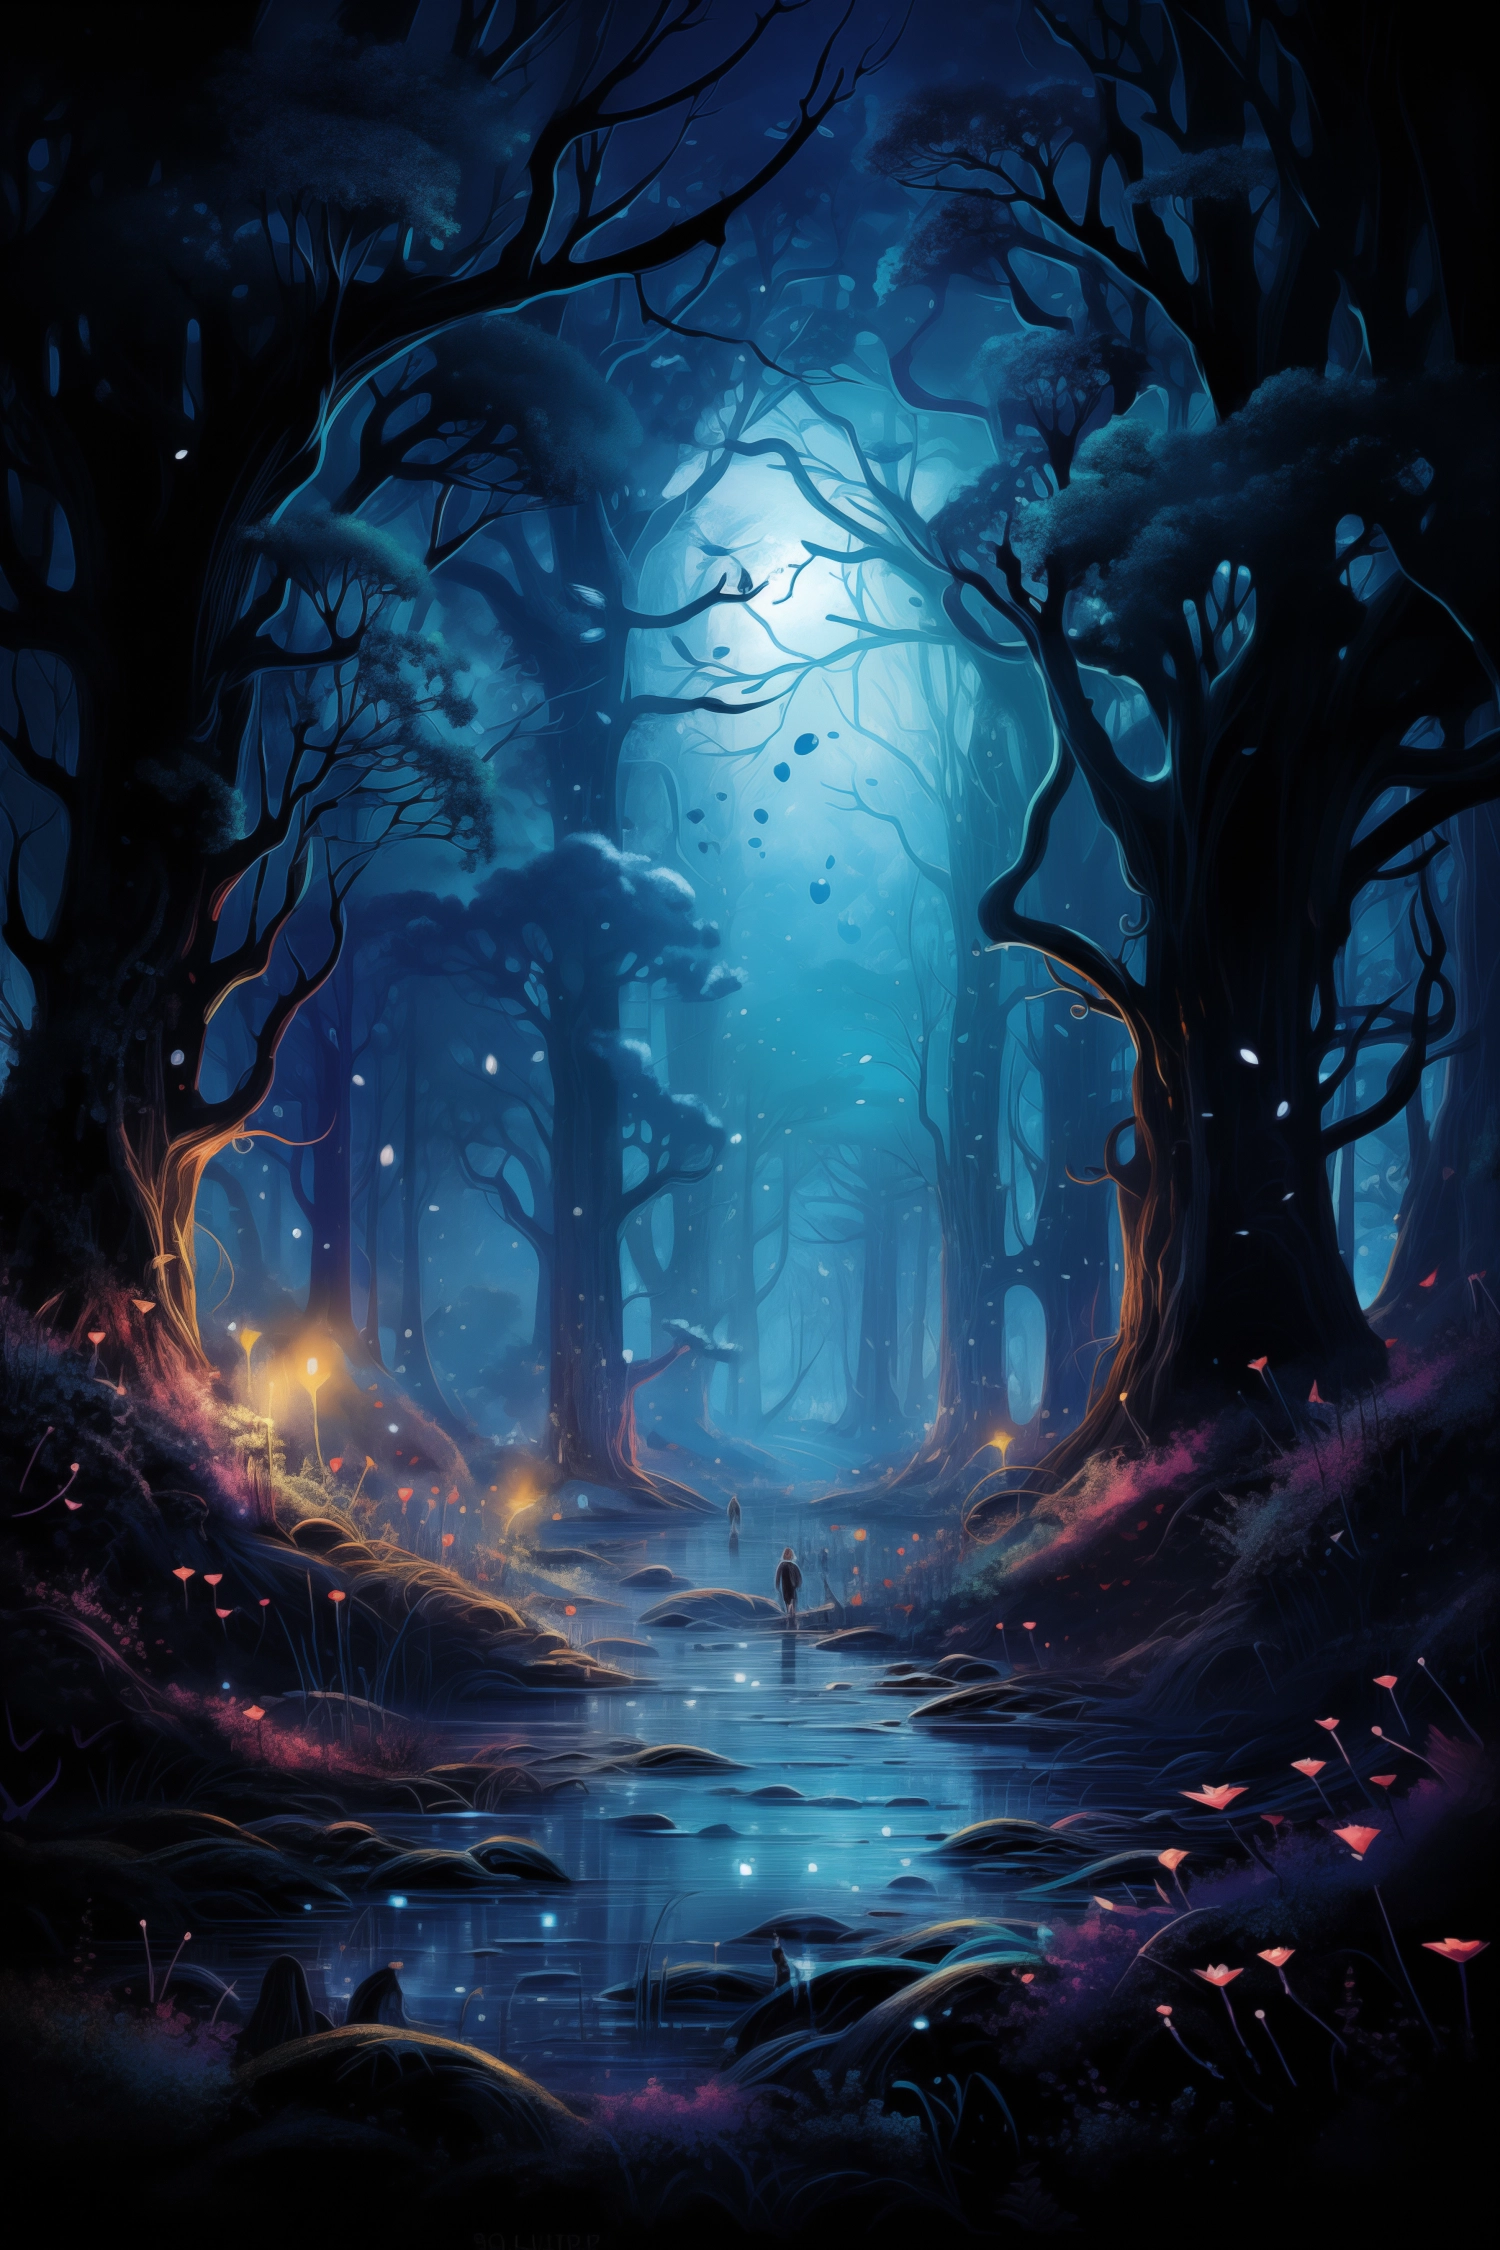 Visual representation of a mystical forest at dusk, where magical creatures emerge from the shadows and the trees are illuminated by bioluminescent plants